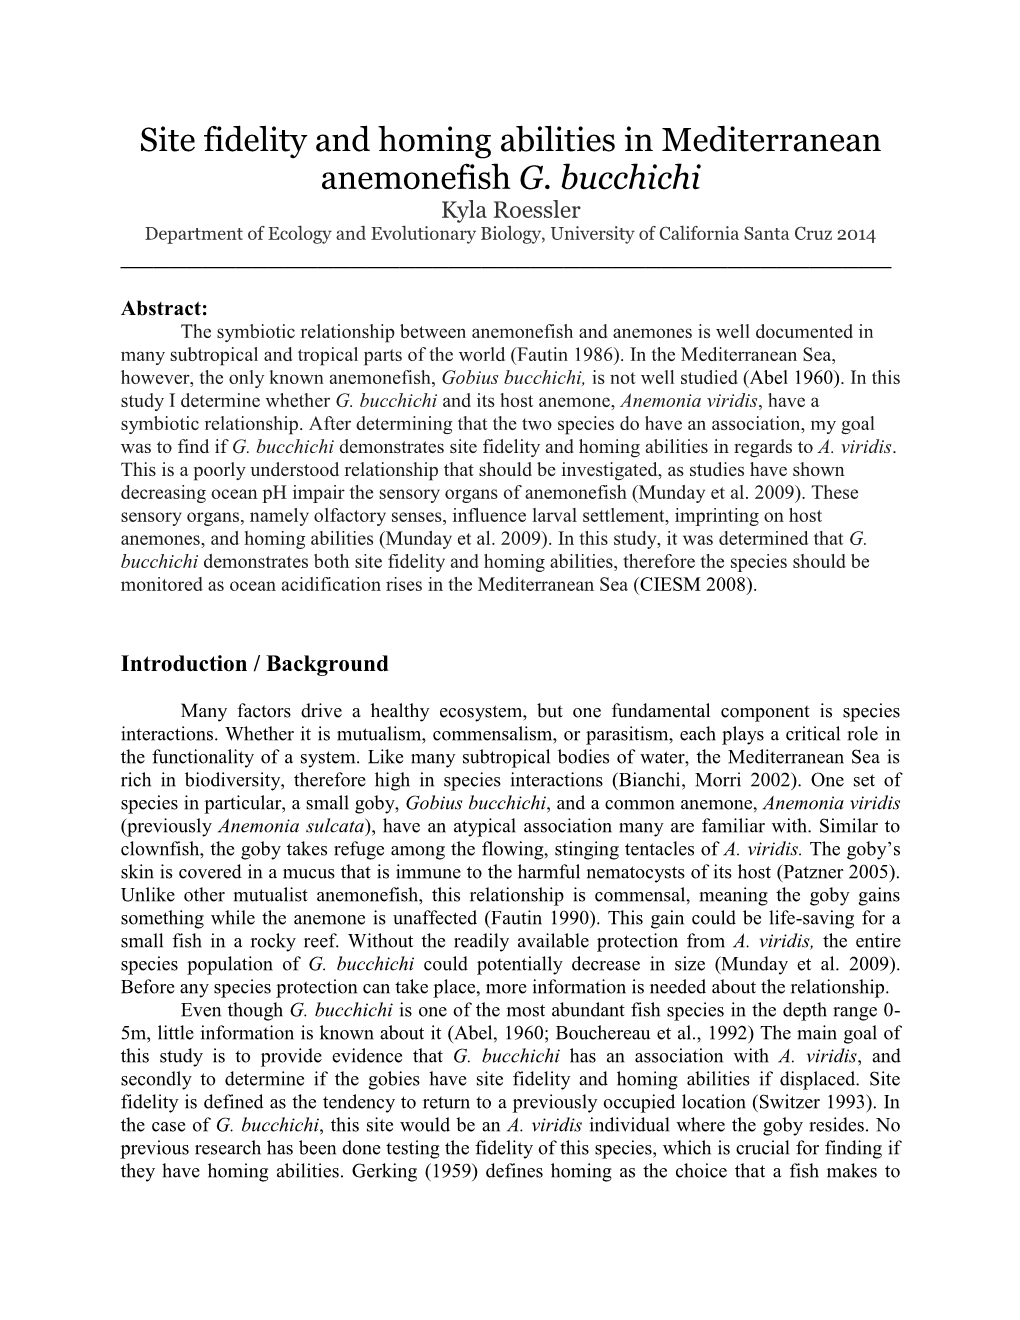 Site Fidelity and Homing Abilities in Mediterranean Anemonefish G